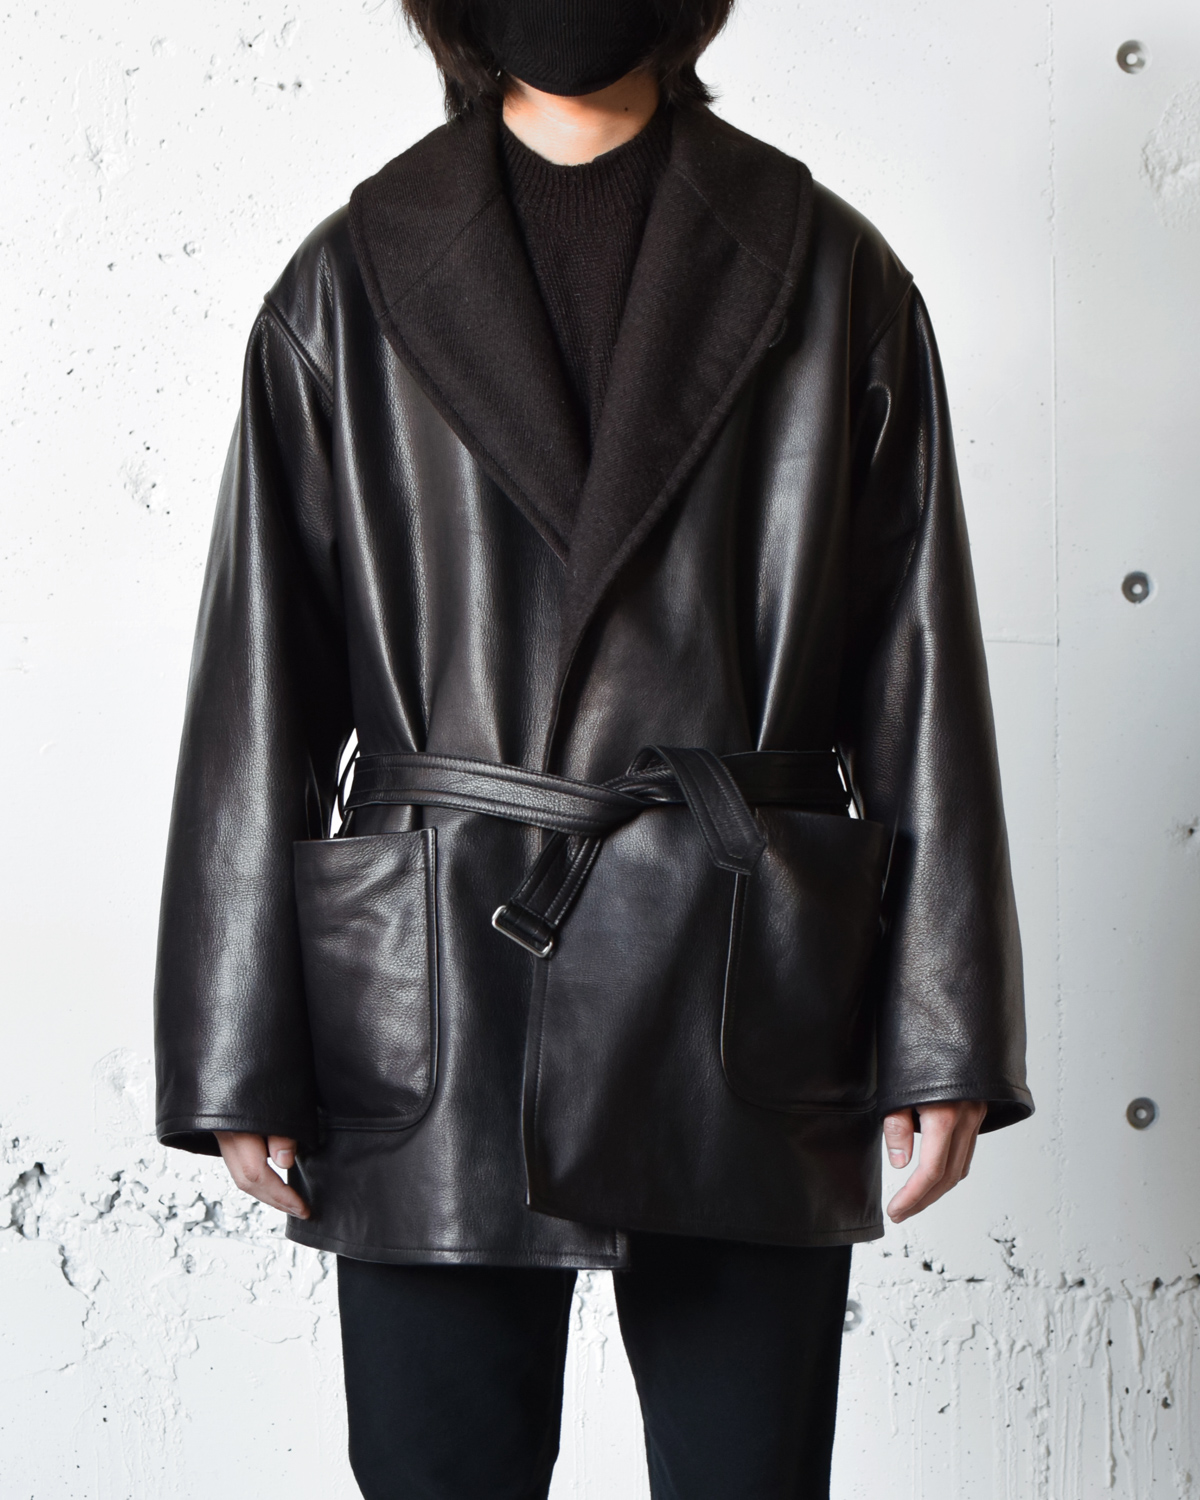 COMOLI “AW21 COLLECTION” -8th DELIVERY- | MAIDENS SHOP ...